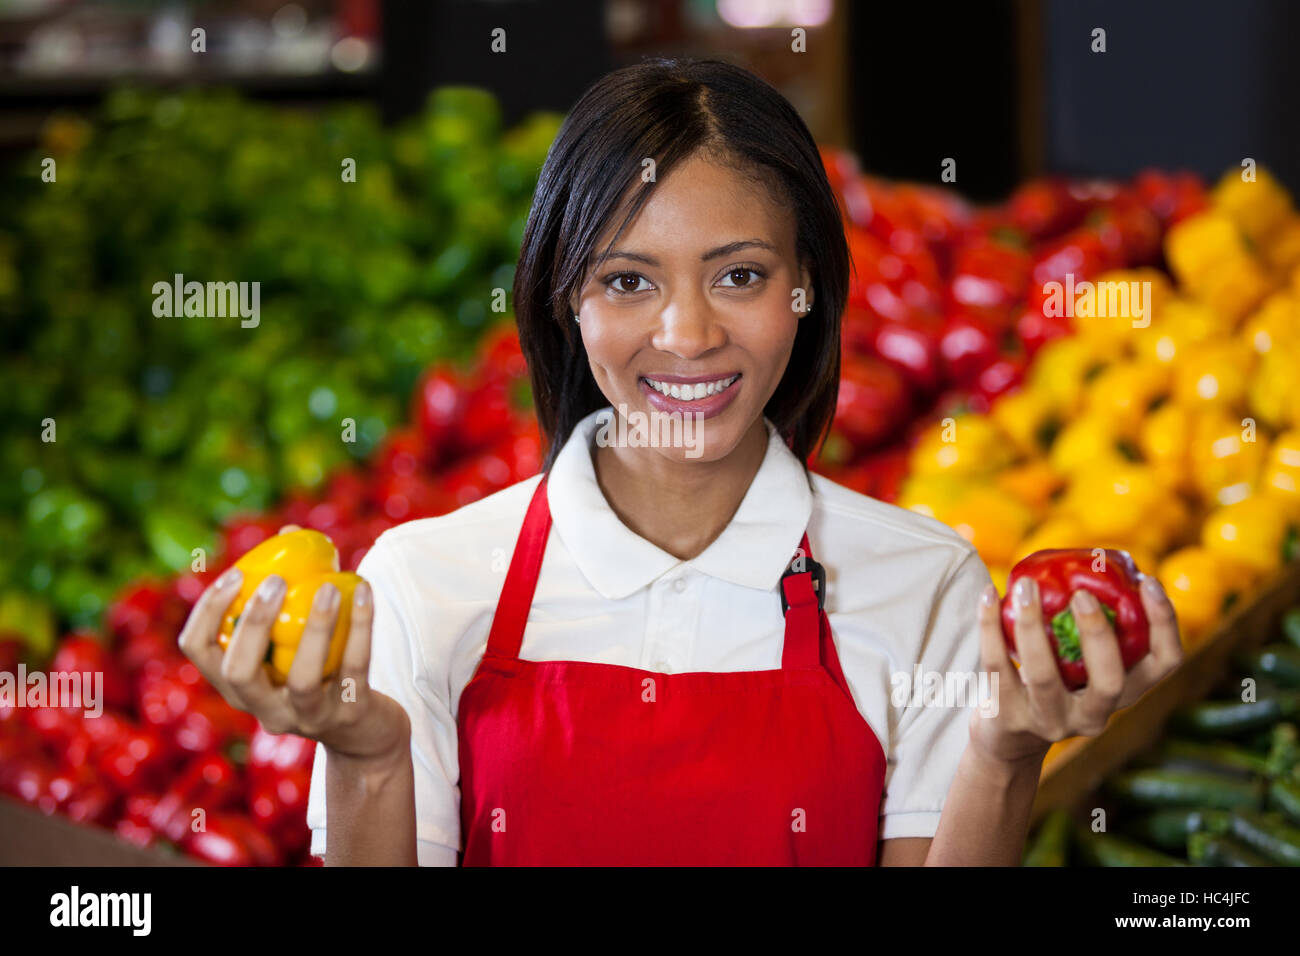 Smiling female staff holding bell peppers in organic section Stock Photo